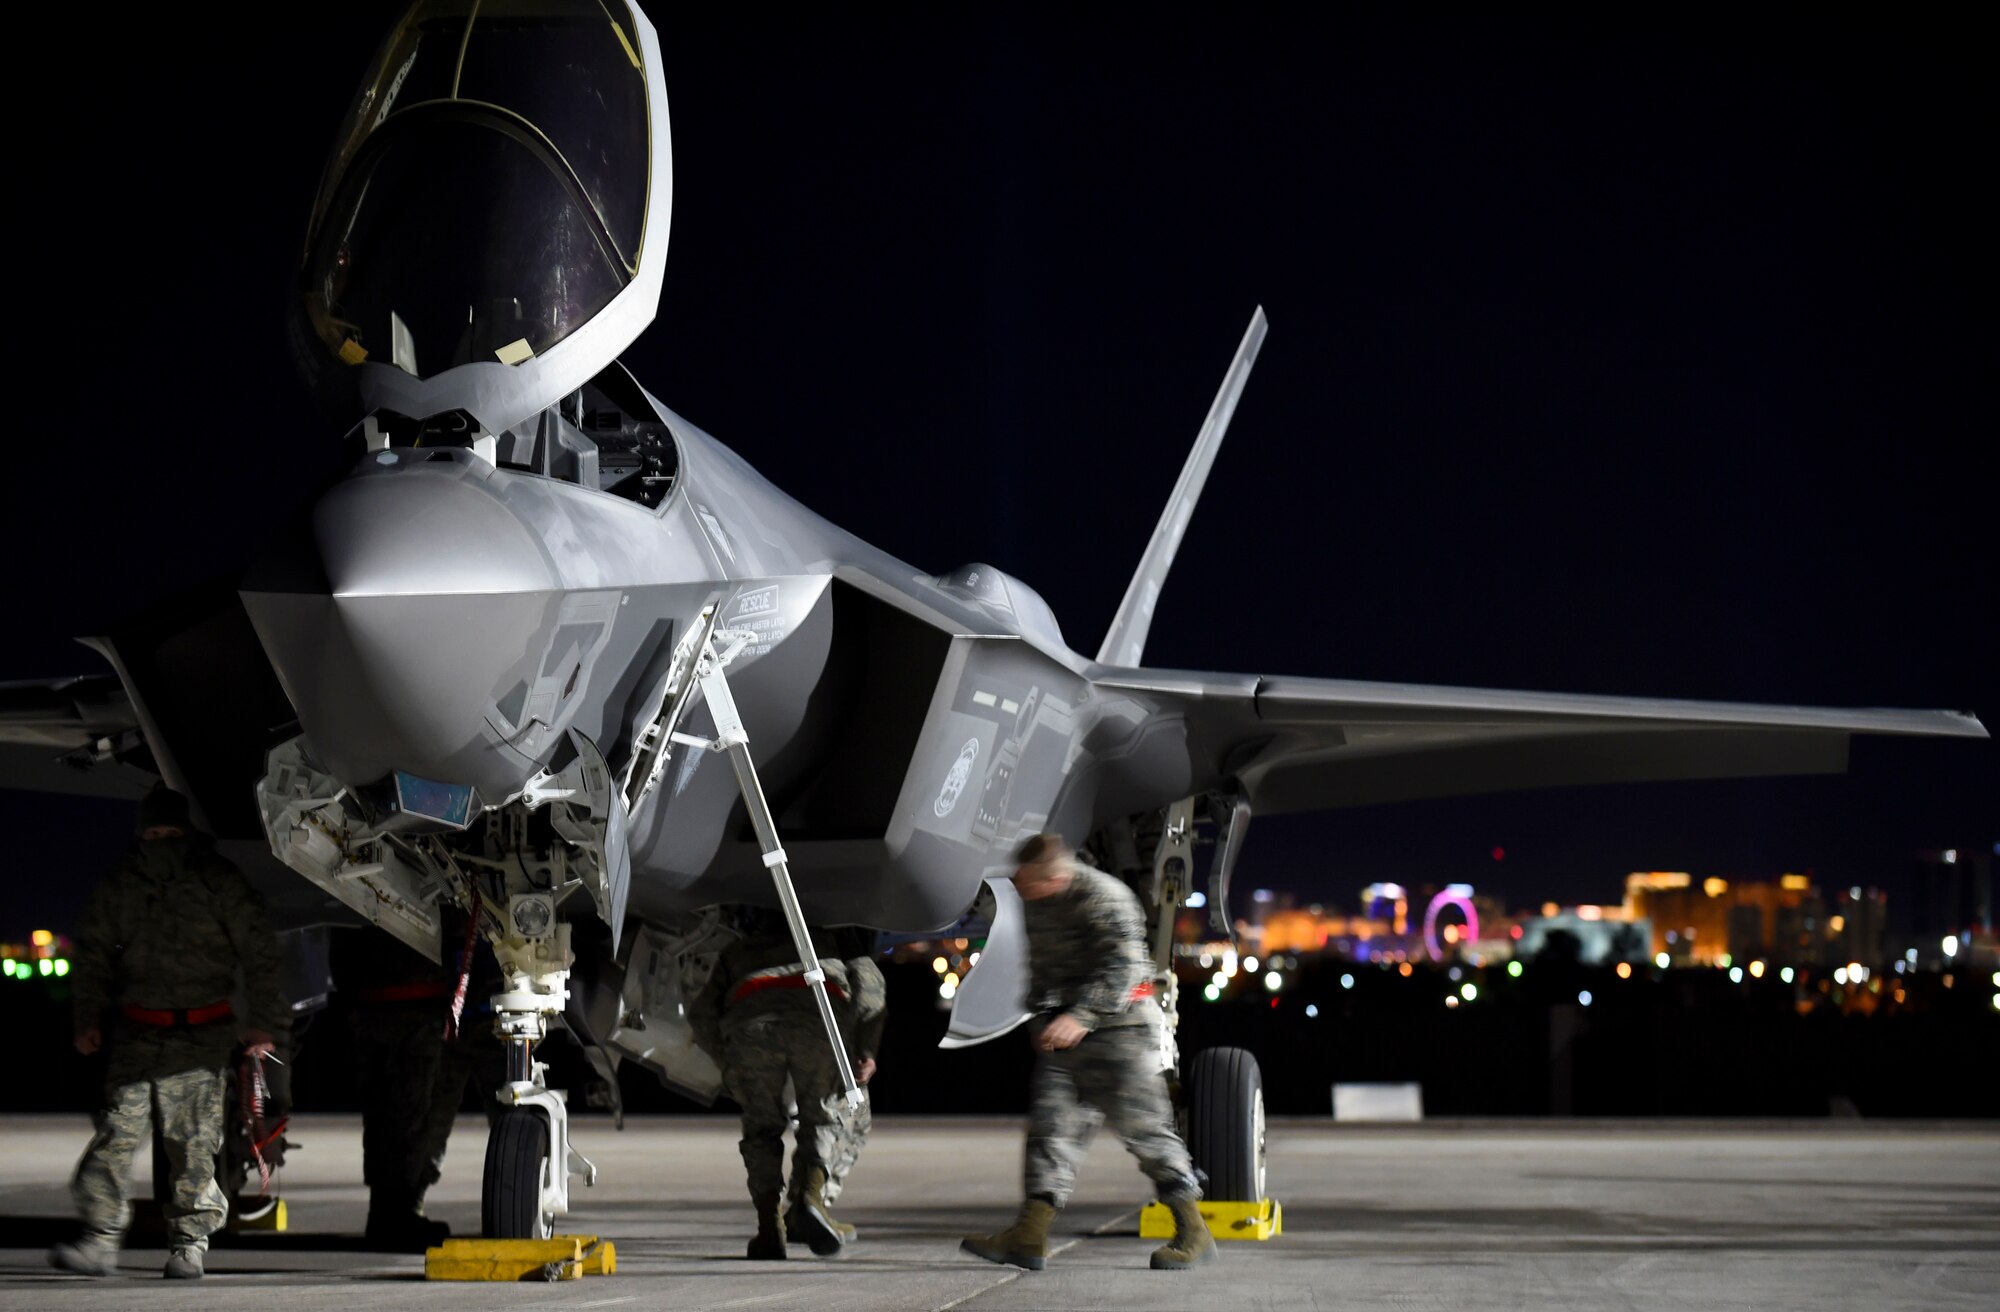 Maintainers from the 419th and 388th Fighter Wings conduct  preflight checks on an F-35A Lightning II from Hill Air Force Base, Utah, during Red Flag 17-1 at Nellis Air Force Base, Nev., Jan. 24, 2017. Airmen from the active duty 388th FW and Air Force Reserve 419th FW fly and maintain the Lightning II in a total force partnership, capitalizing on the strength of both components. (U.S. Air Force photo by Staff Sgt. Natasha Stannard)